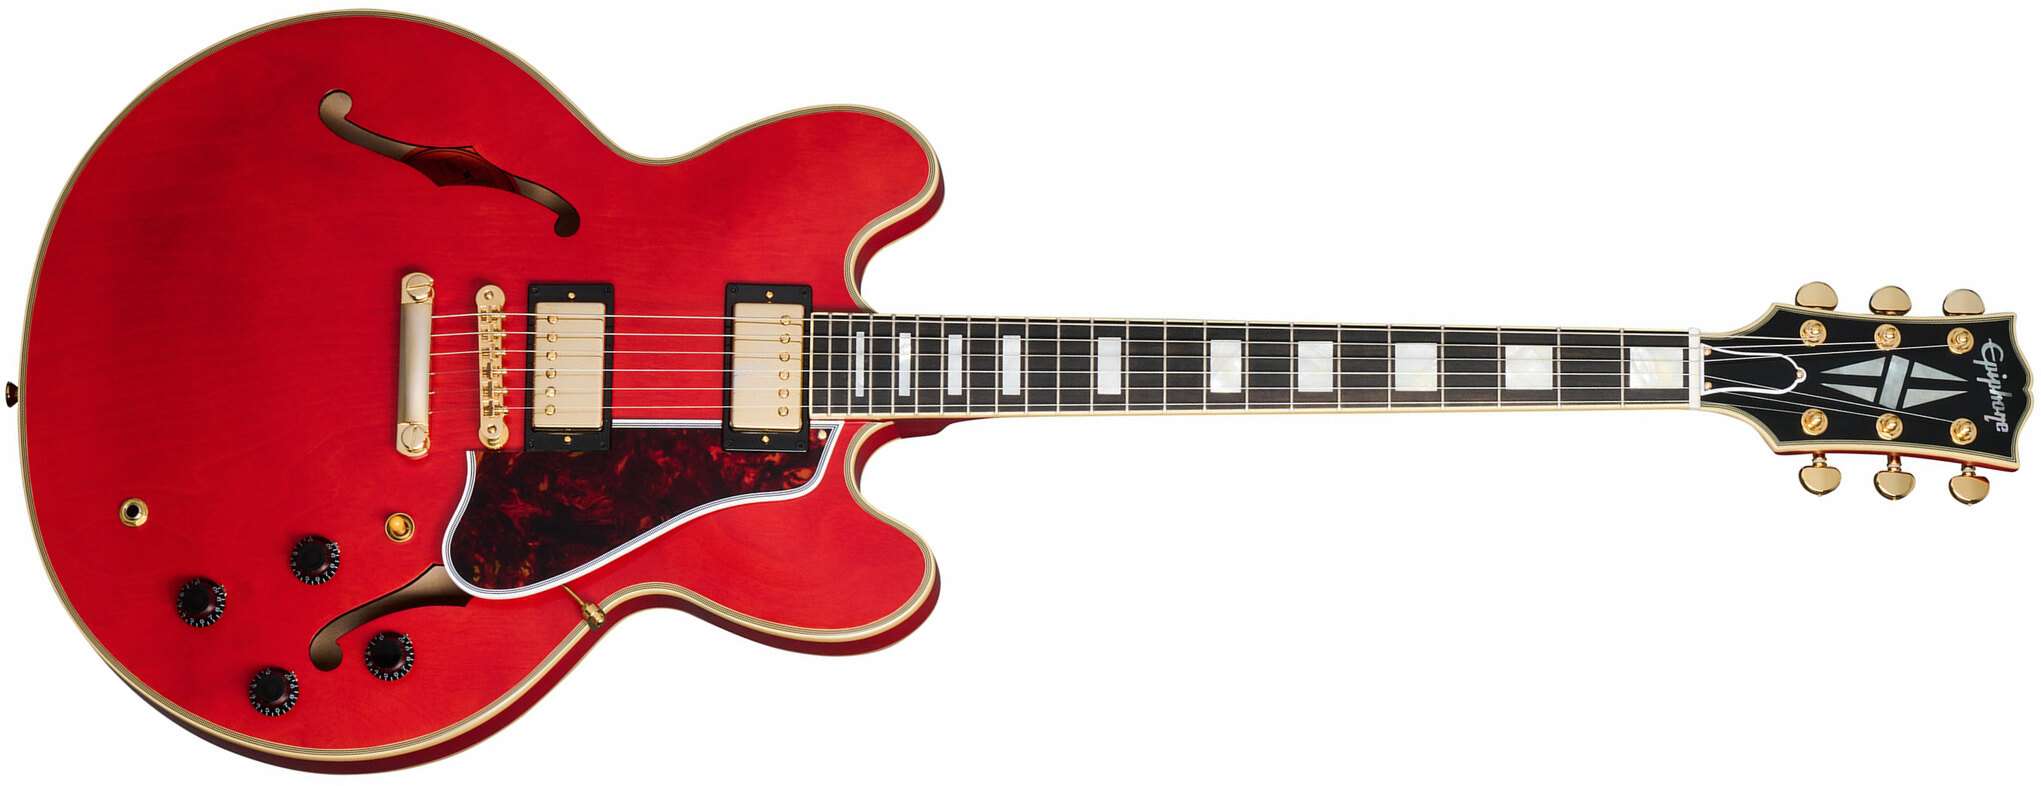 Epiphone Es355 1959 Inspired By 2h Gibson Ht Eb - Vos Cherry Red - Semi-hollow electric guitar - Main picture